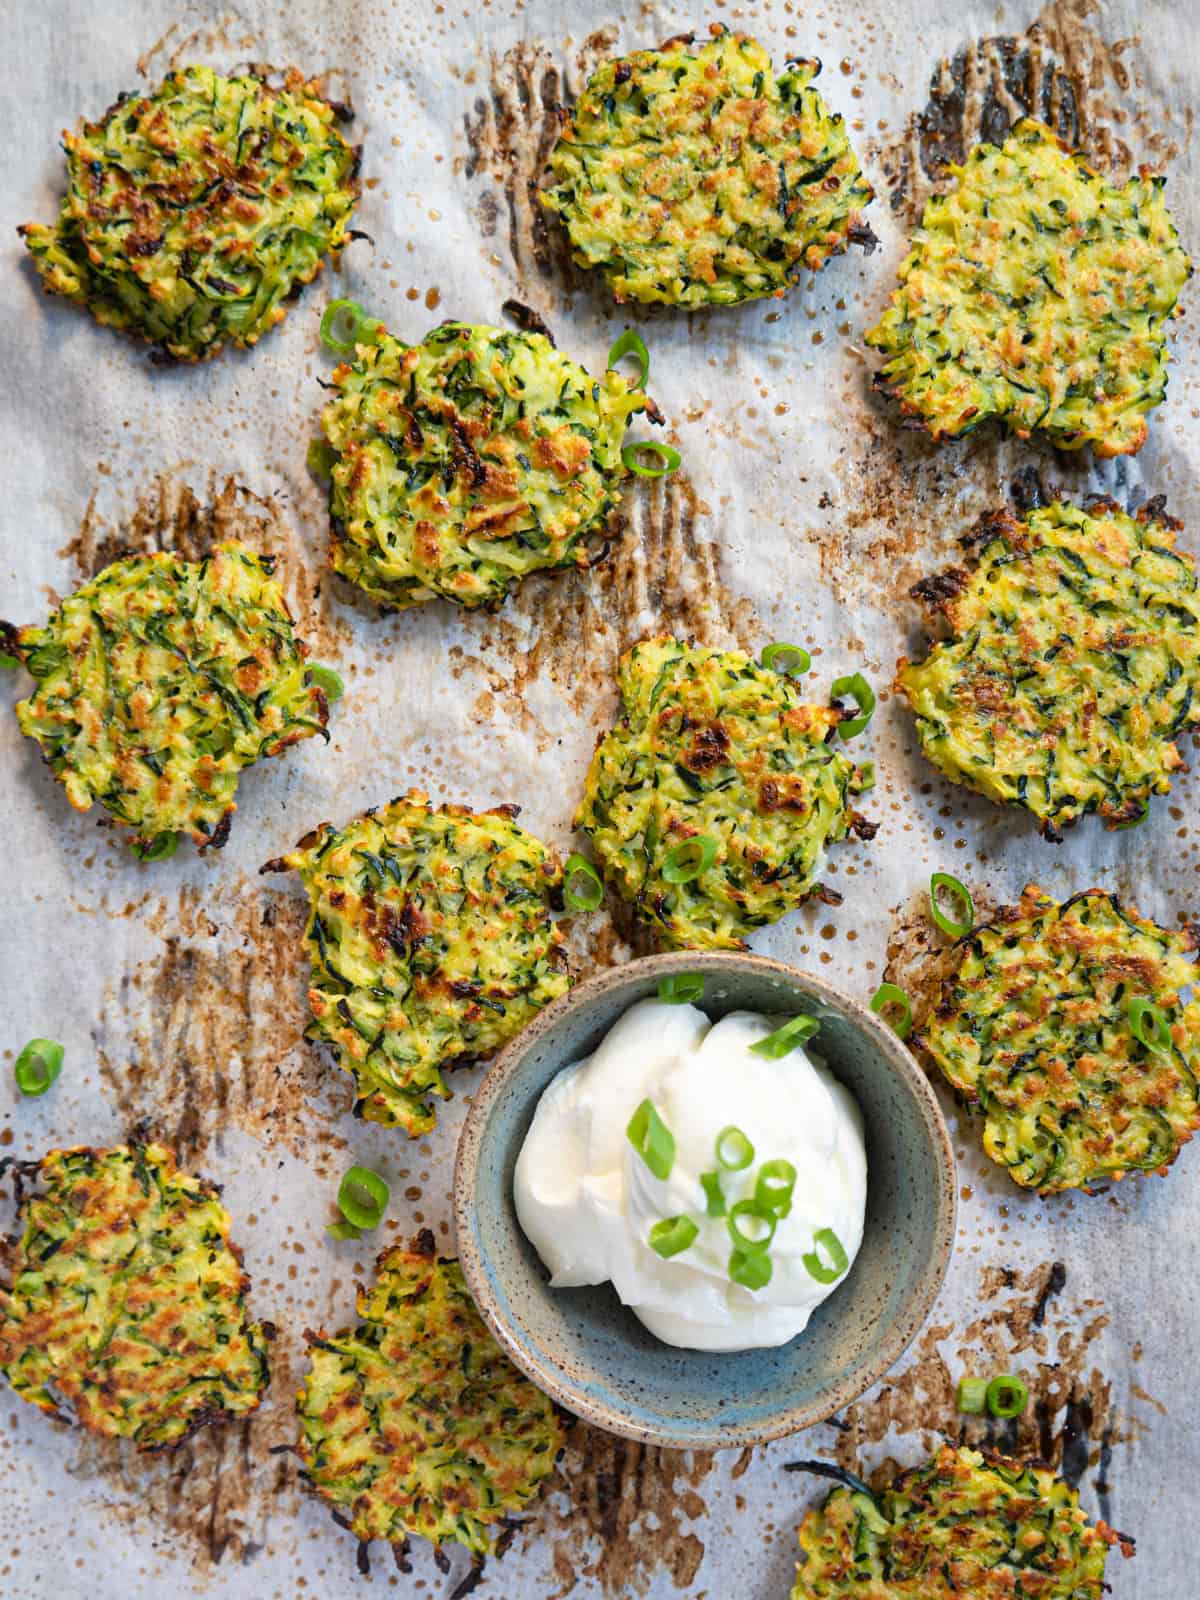 Baked zucchini fritters on a tray with a dish of sour cream garnished with green onions.